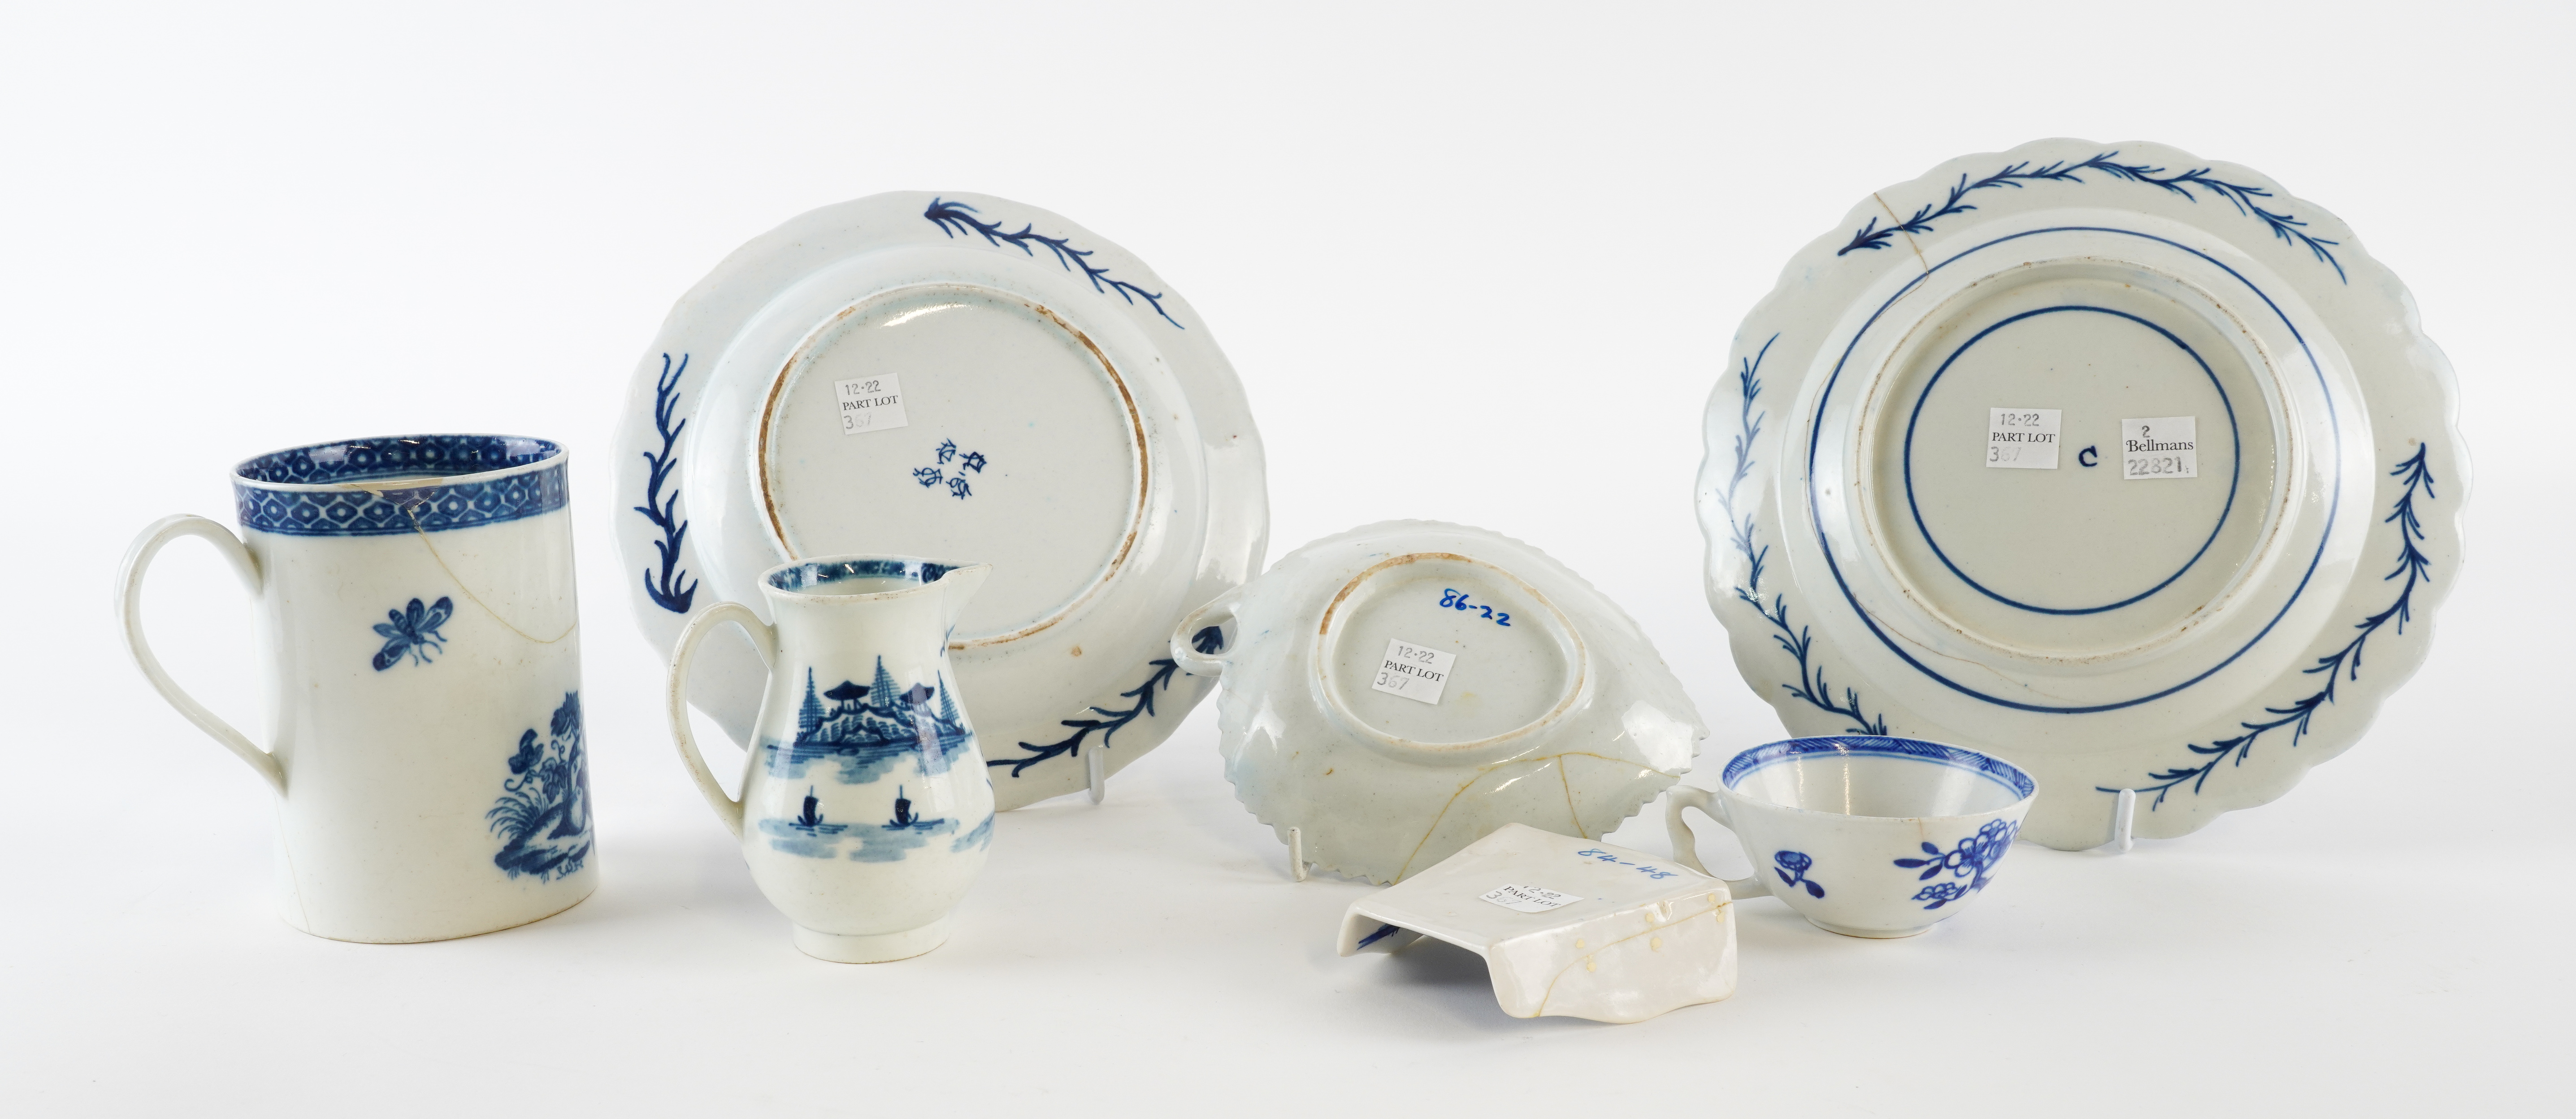 A GROUP OF SEVEN PIECES OF ENGLISH BLUE AND WHITE PORCELAIN - Image 2 of 2